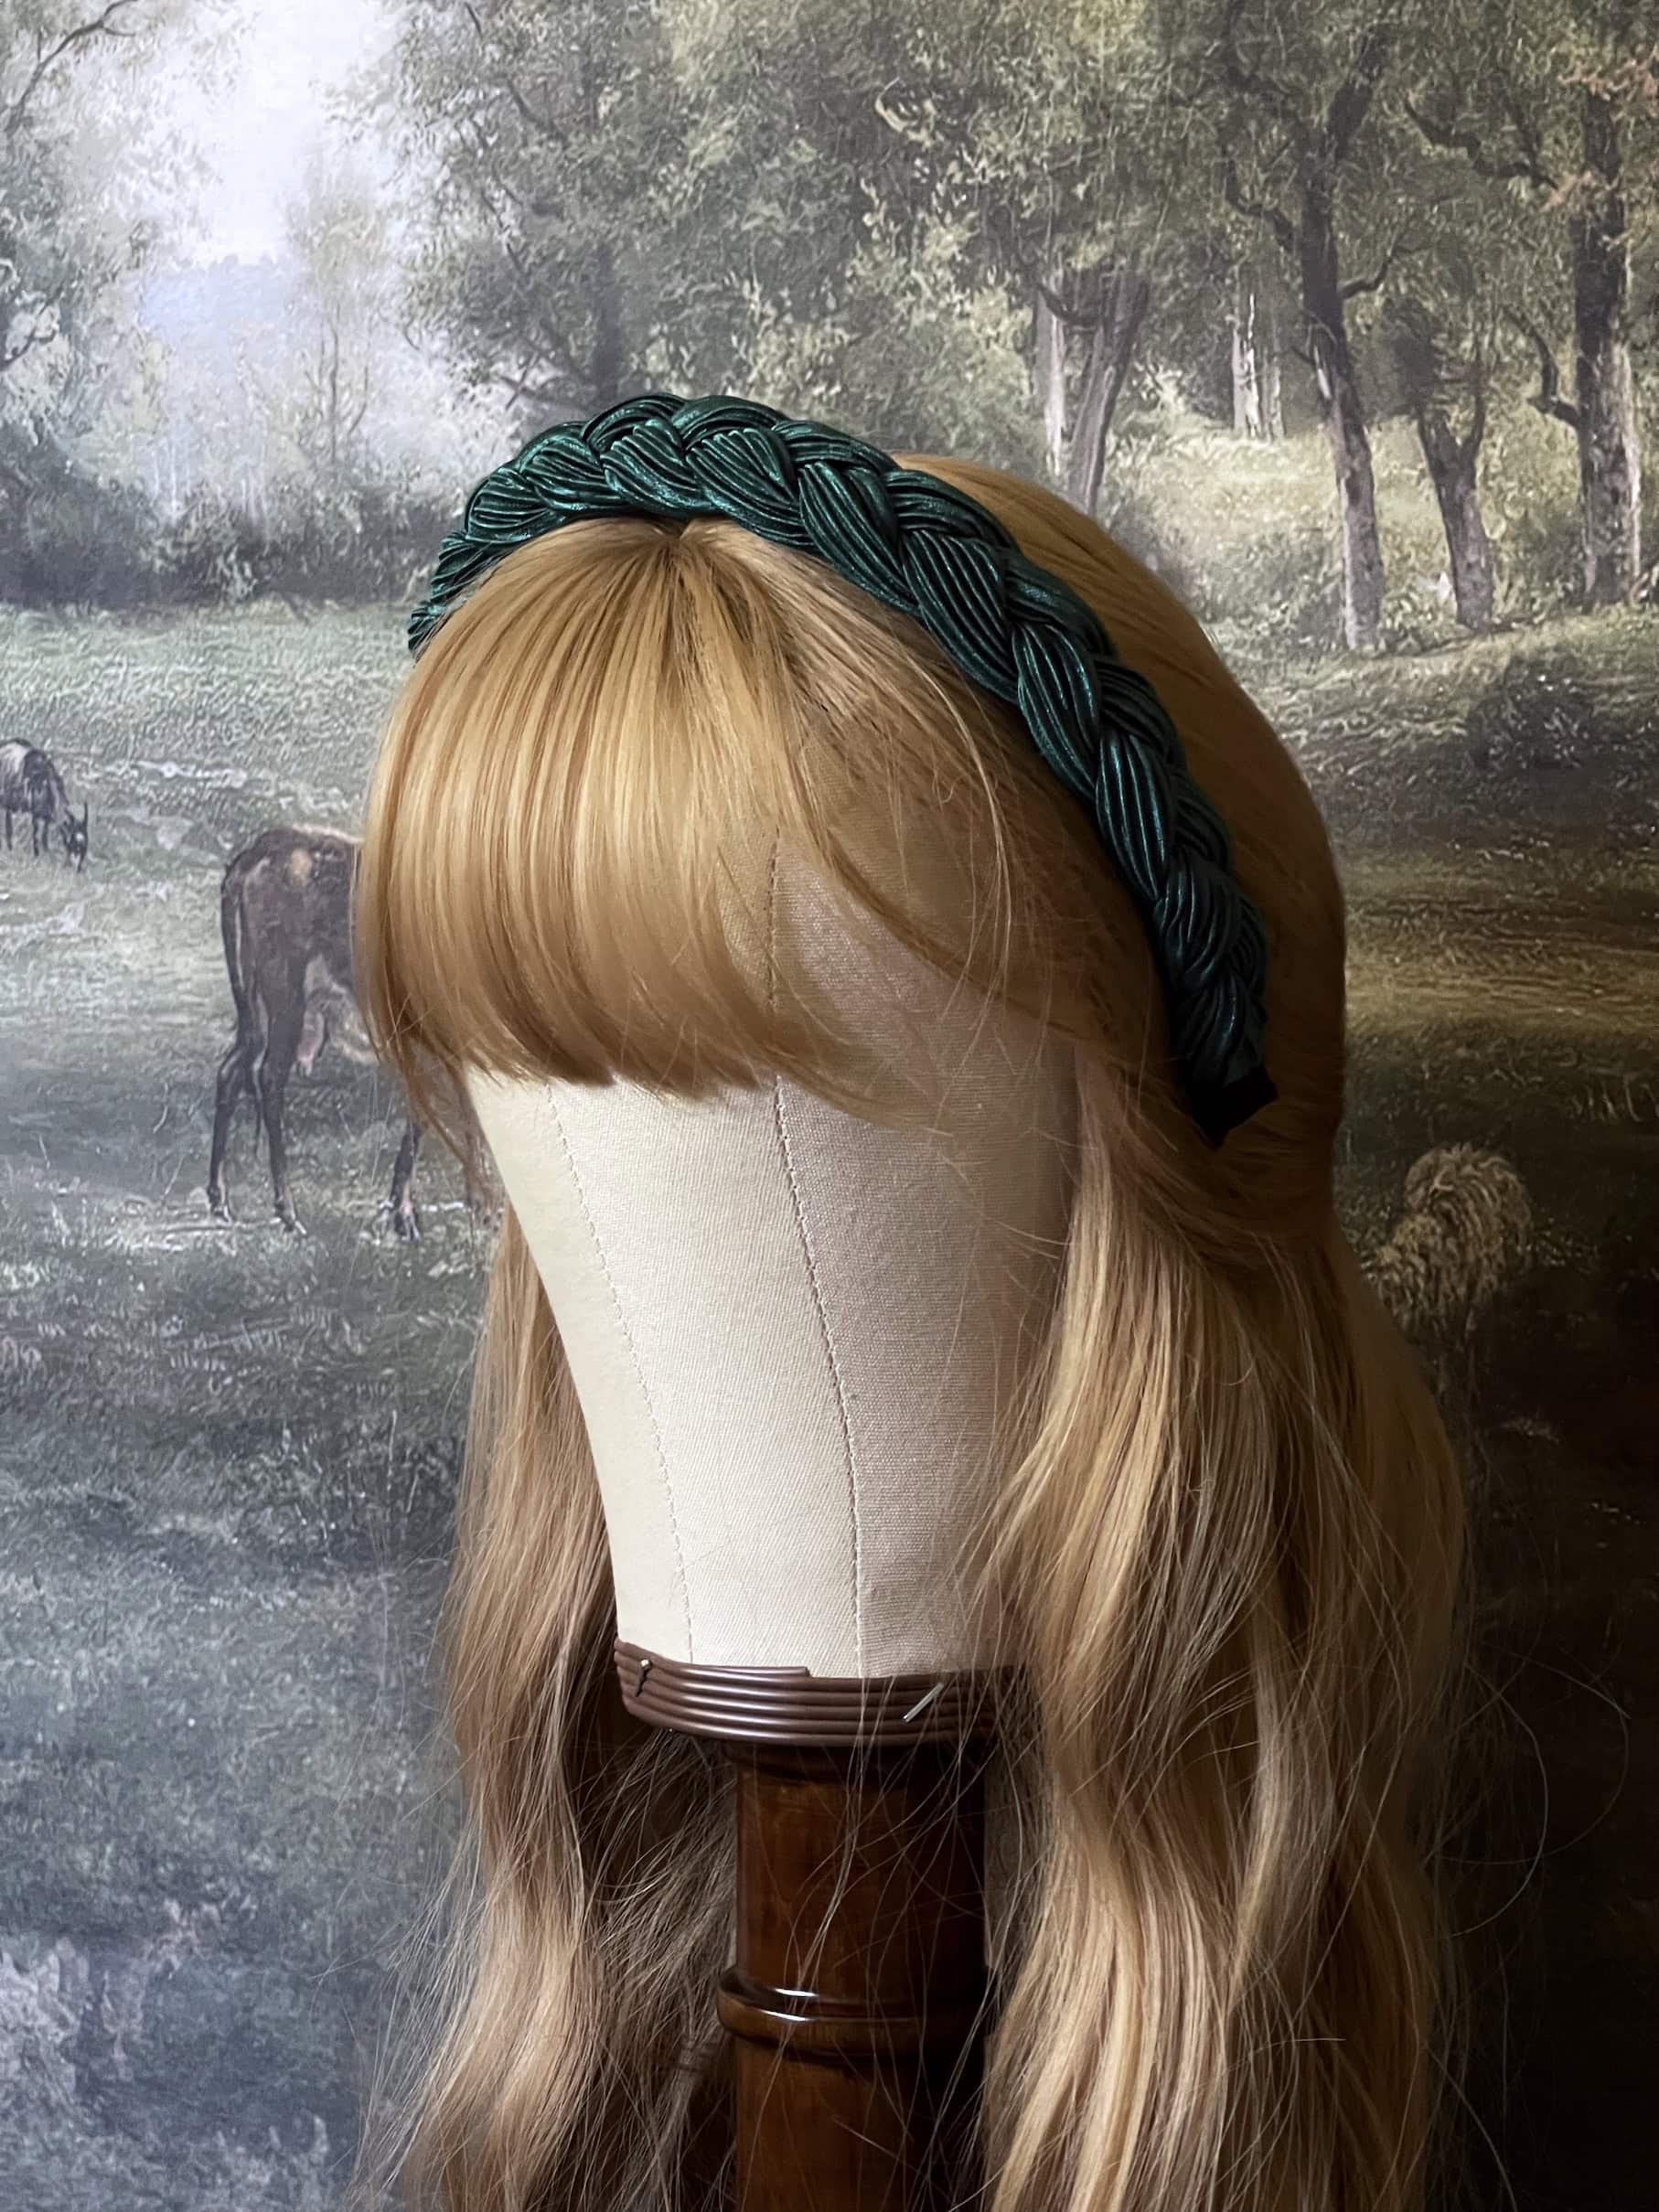 A historically inspired vintage style braided headband in dark forest green is pictured on a mannequin in front of an art history backdrop.